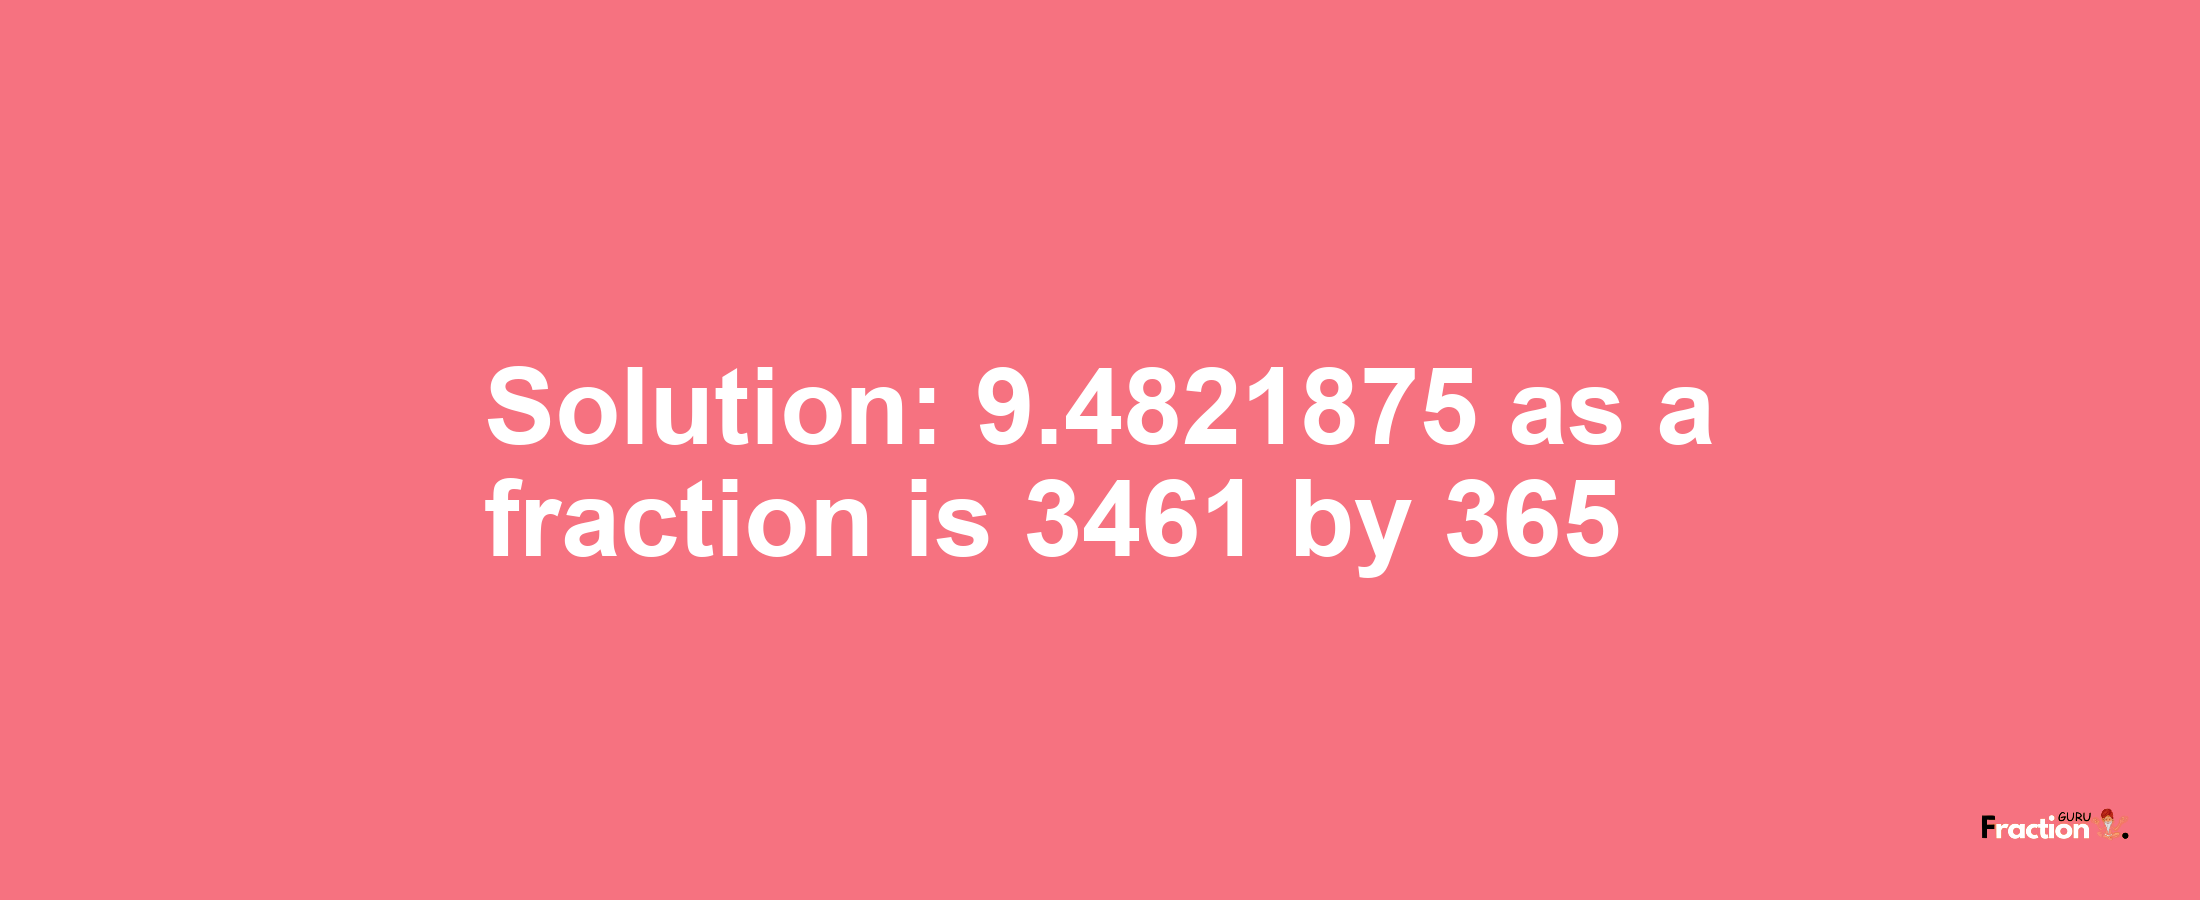 Solution:9.4821875 as a fraction is 3461/365